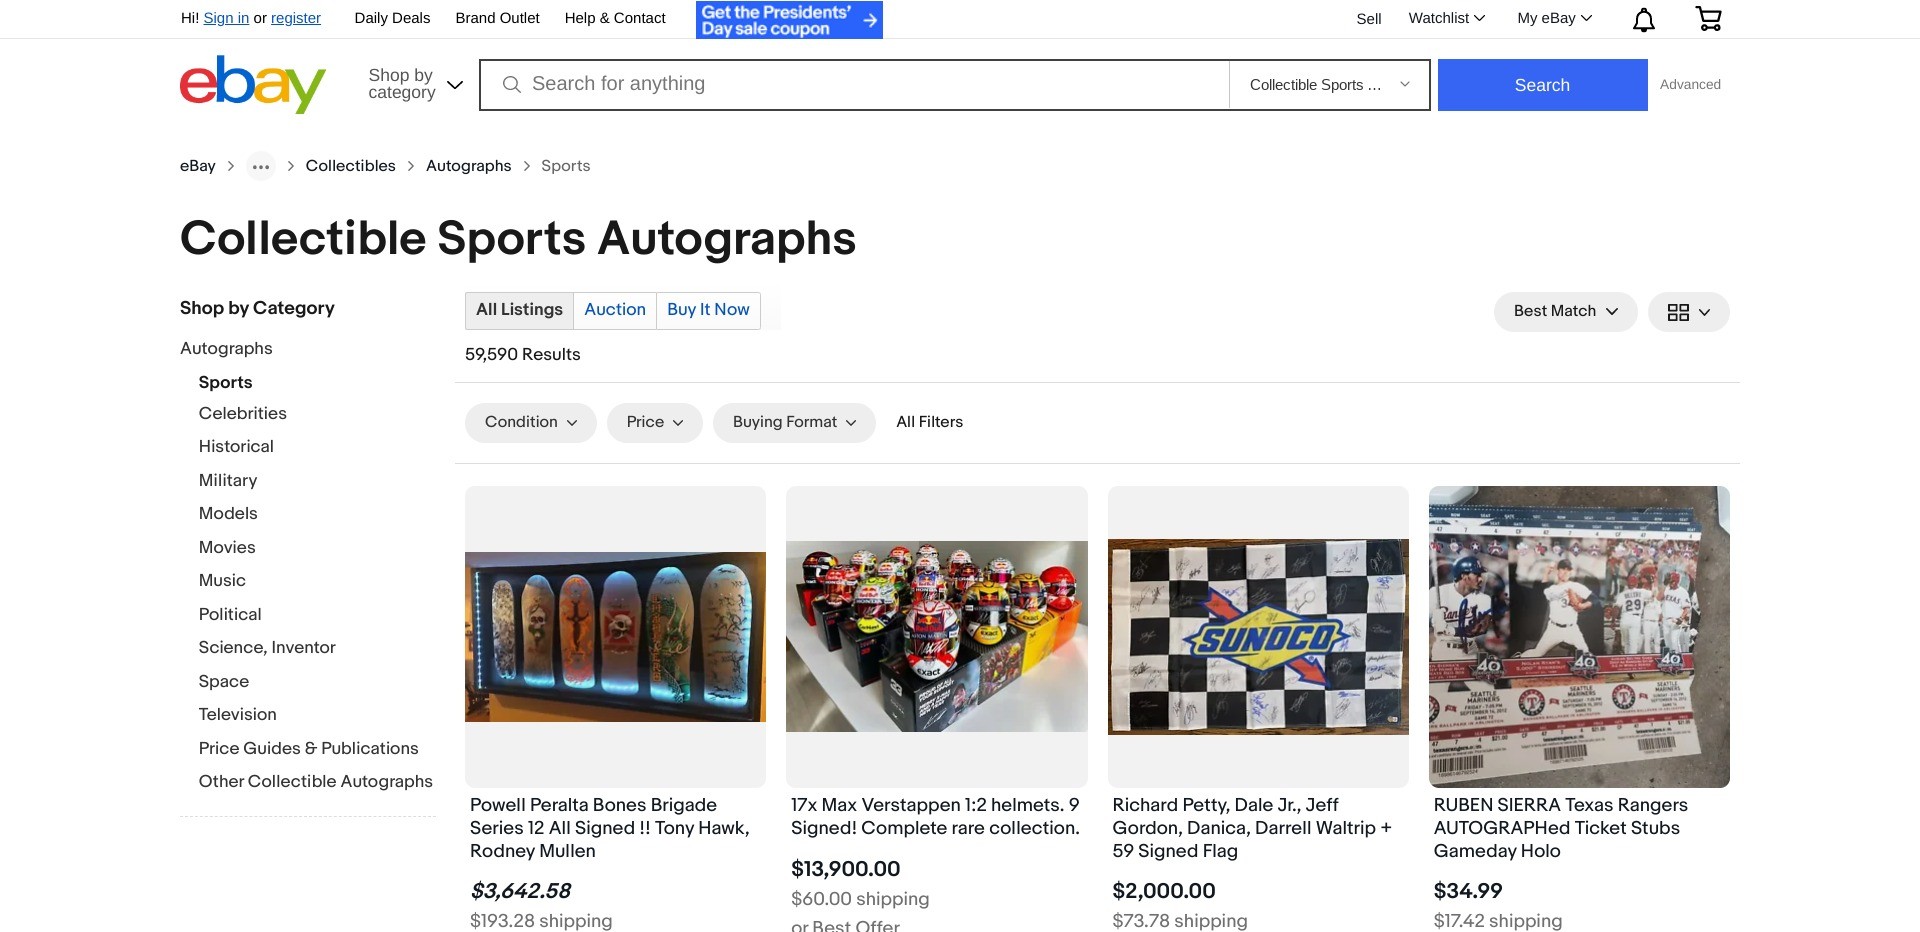 Screenshot of the Collectible Sports Autographs section on ebay.com